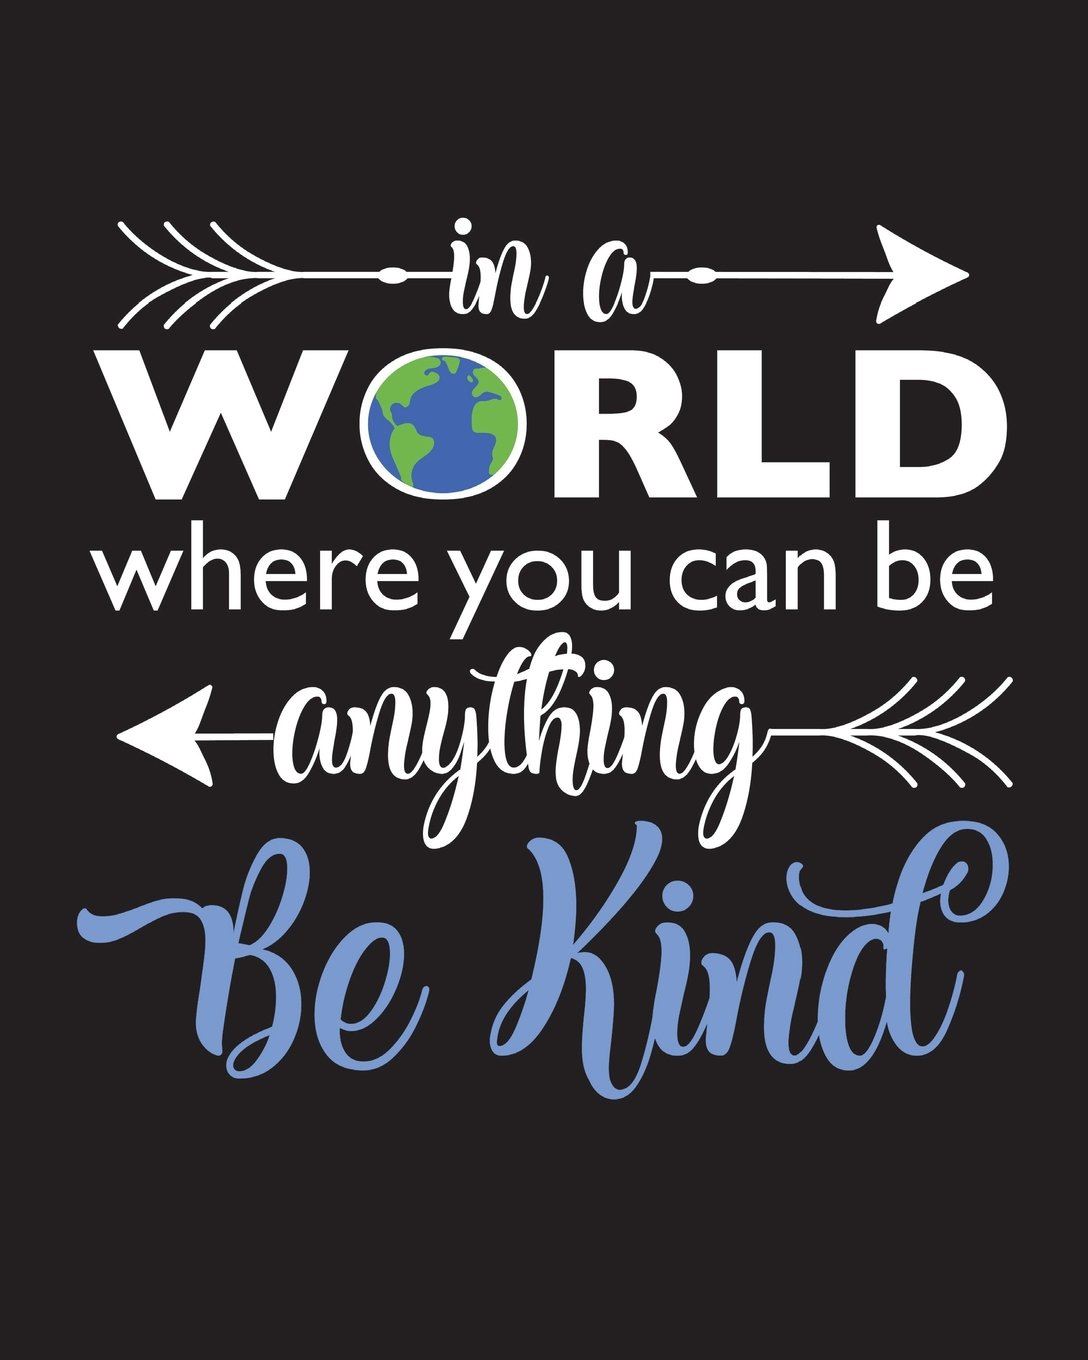 In a world where you can be anything, be kind.